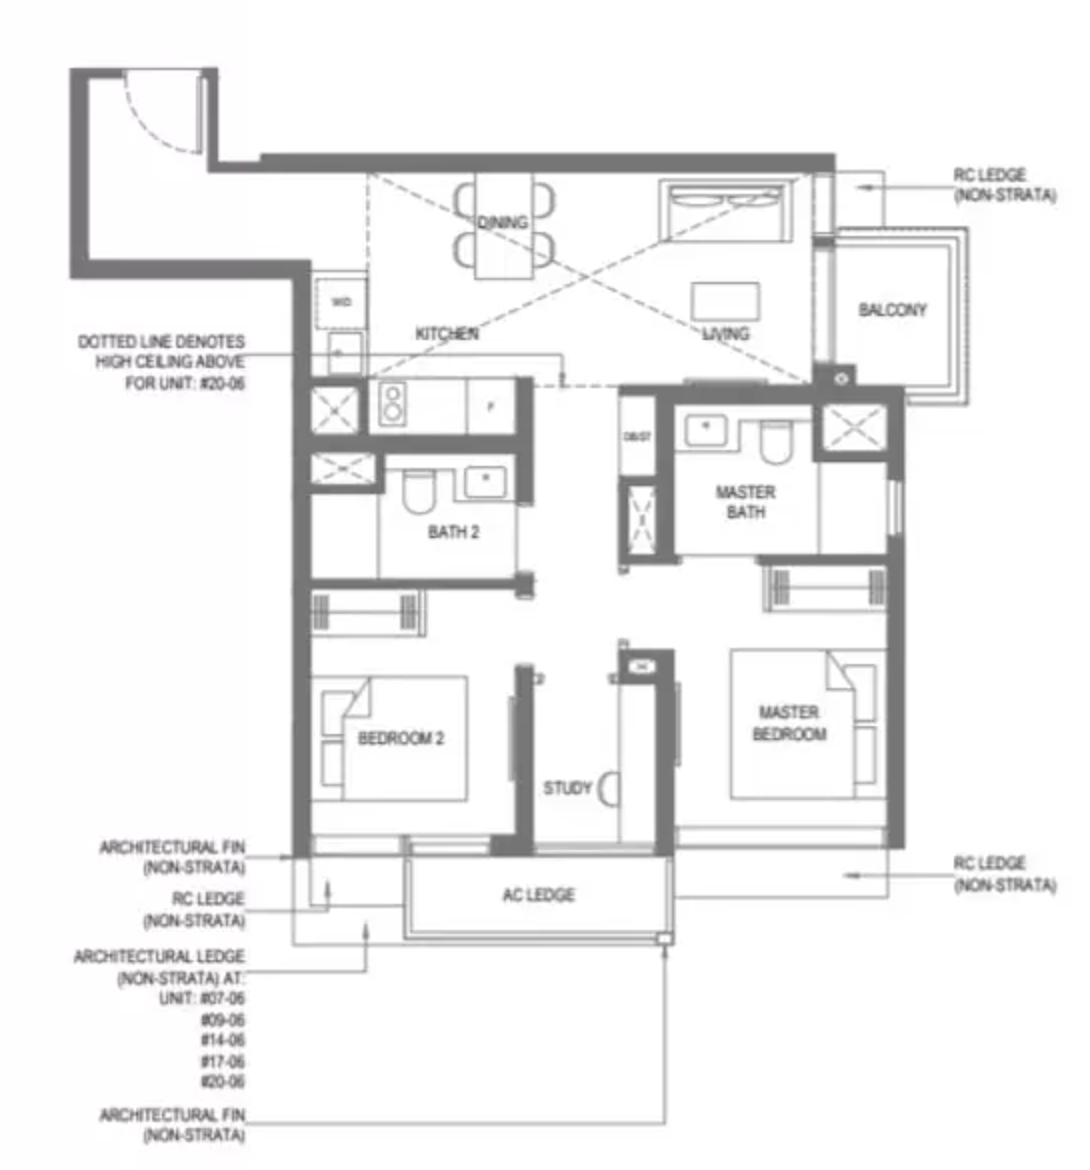 The M BS6 2-Bedroom layout